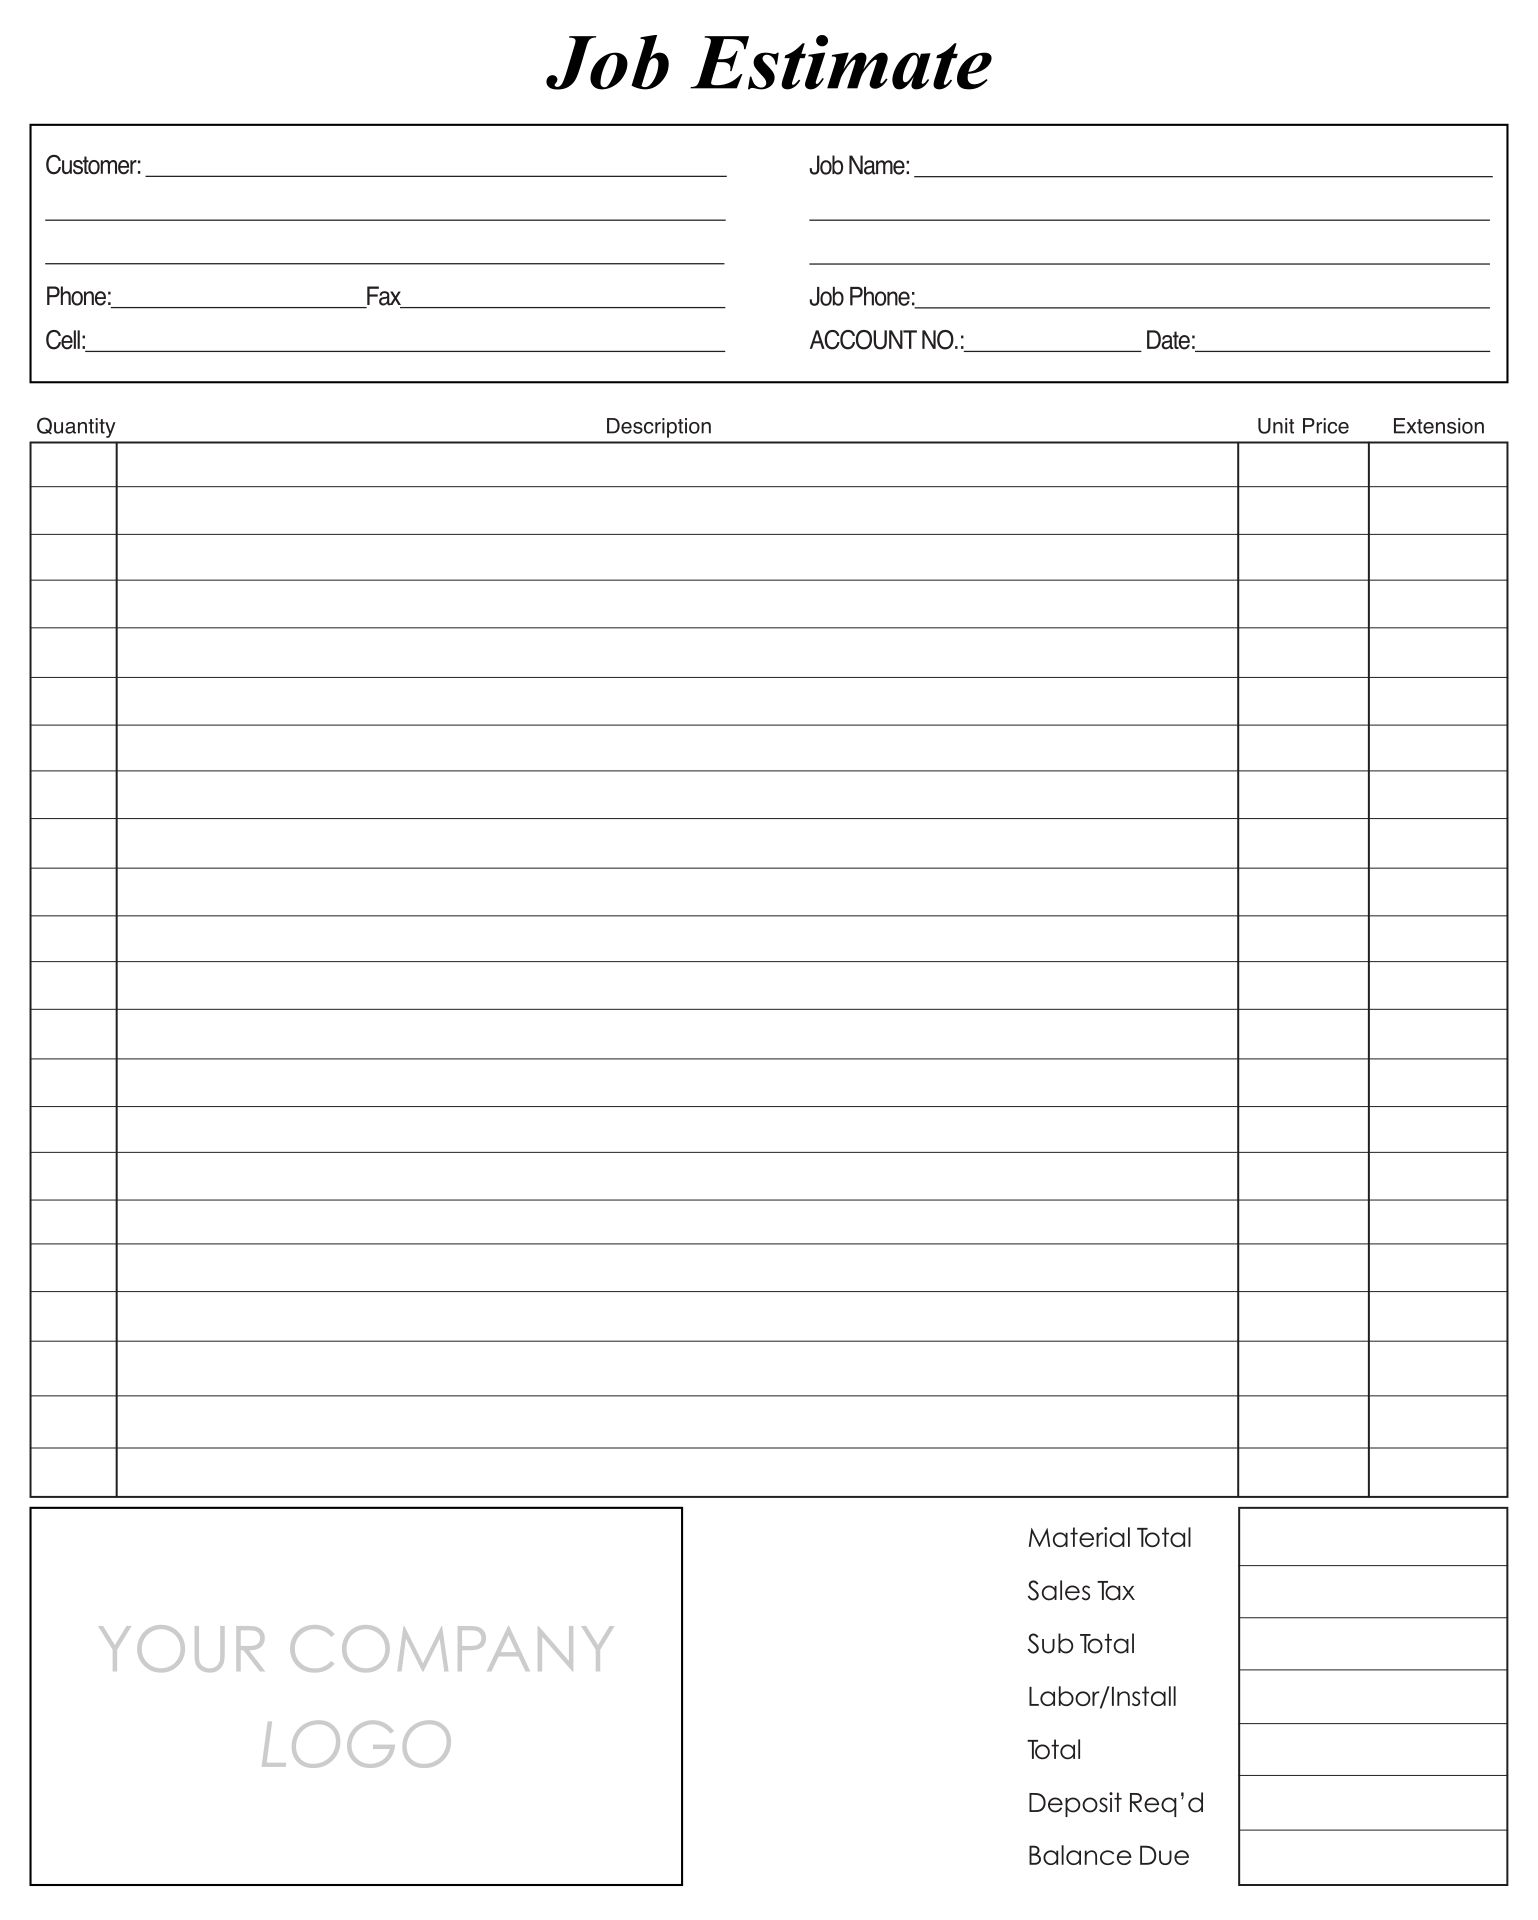 Printable Roof Estimate Forms Printable Forms Free Online